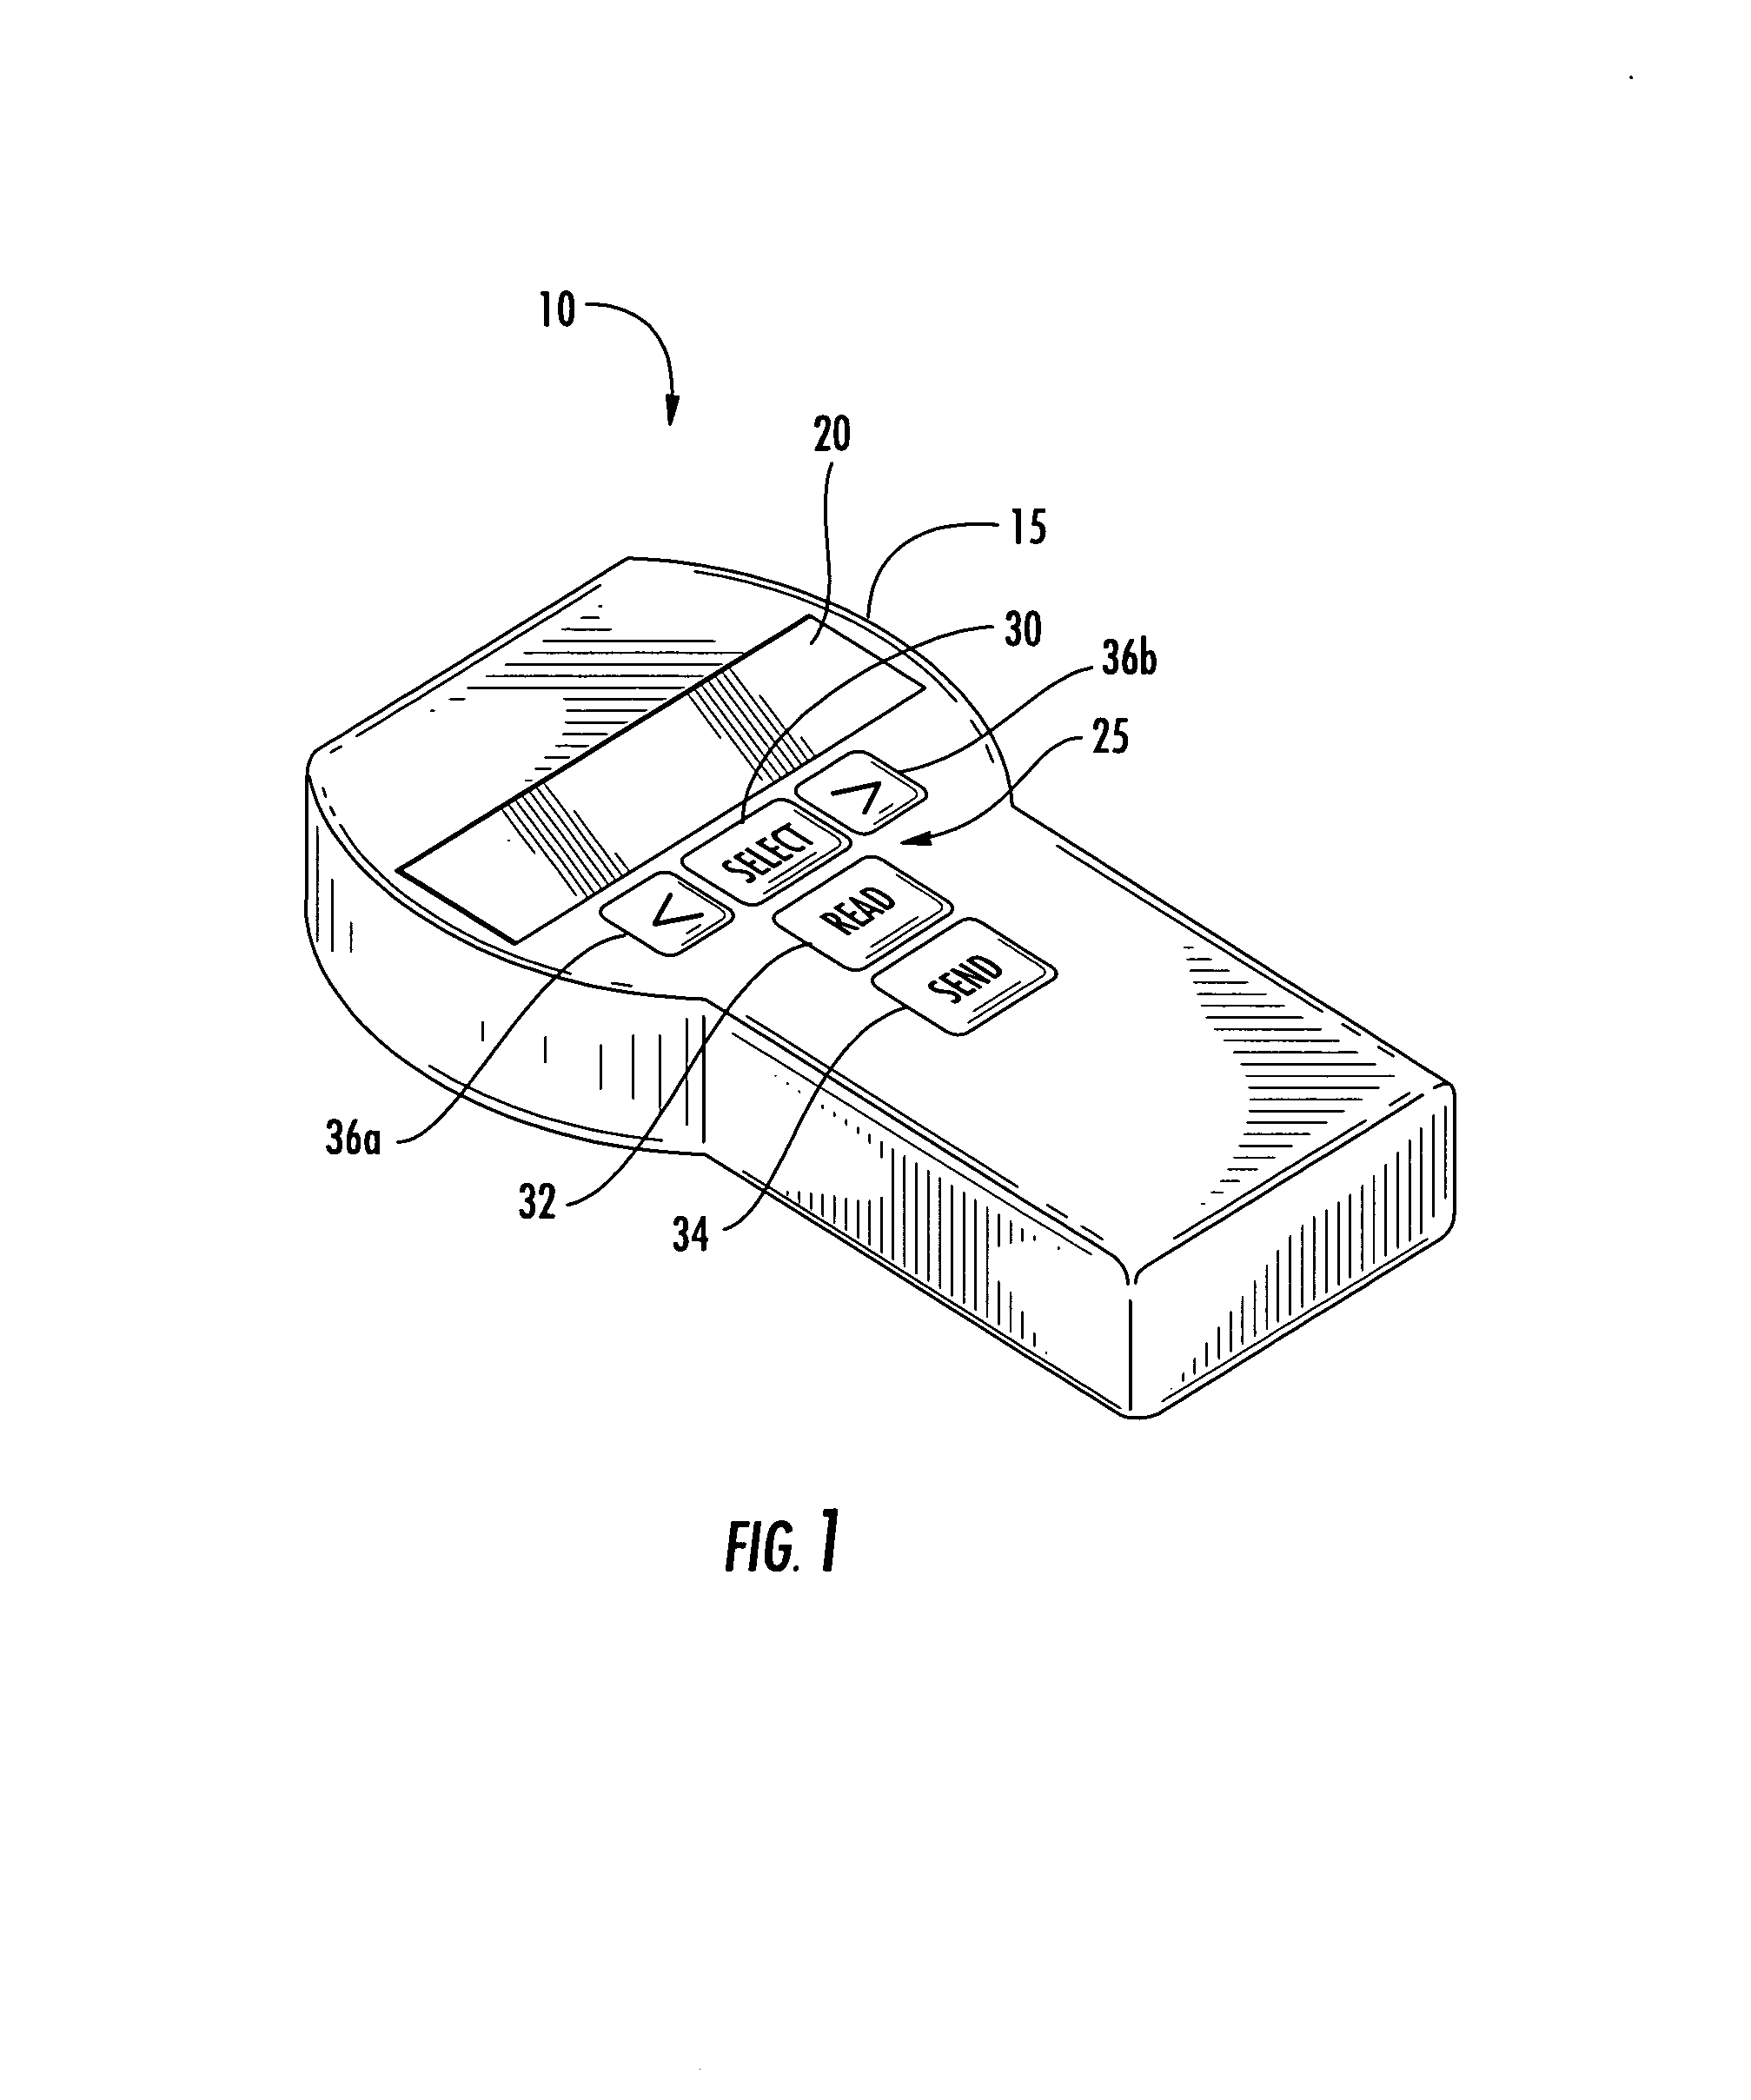 Handheld device for retrieving and analyzing data from an electronic monitoring device